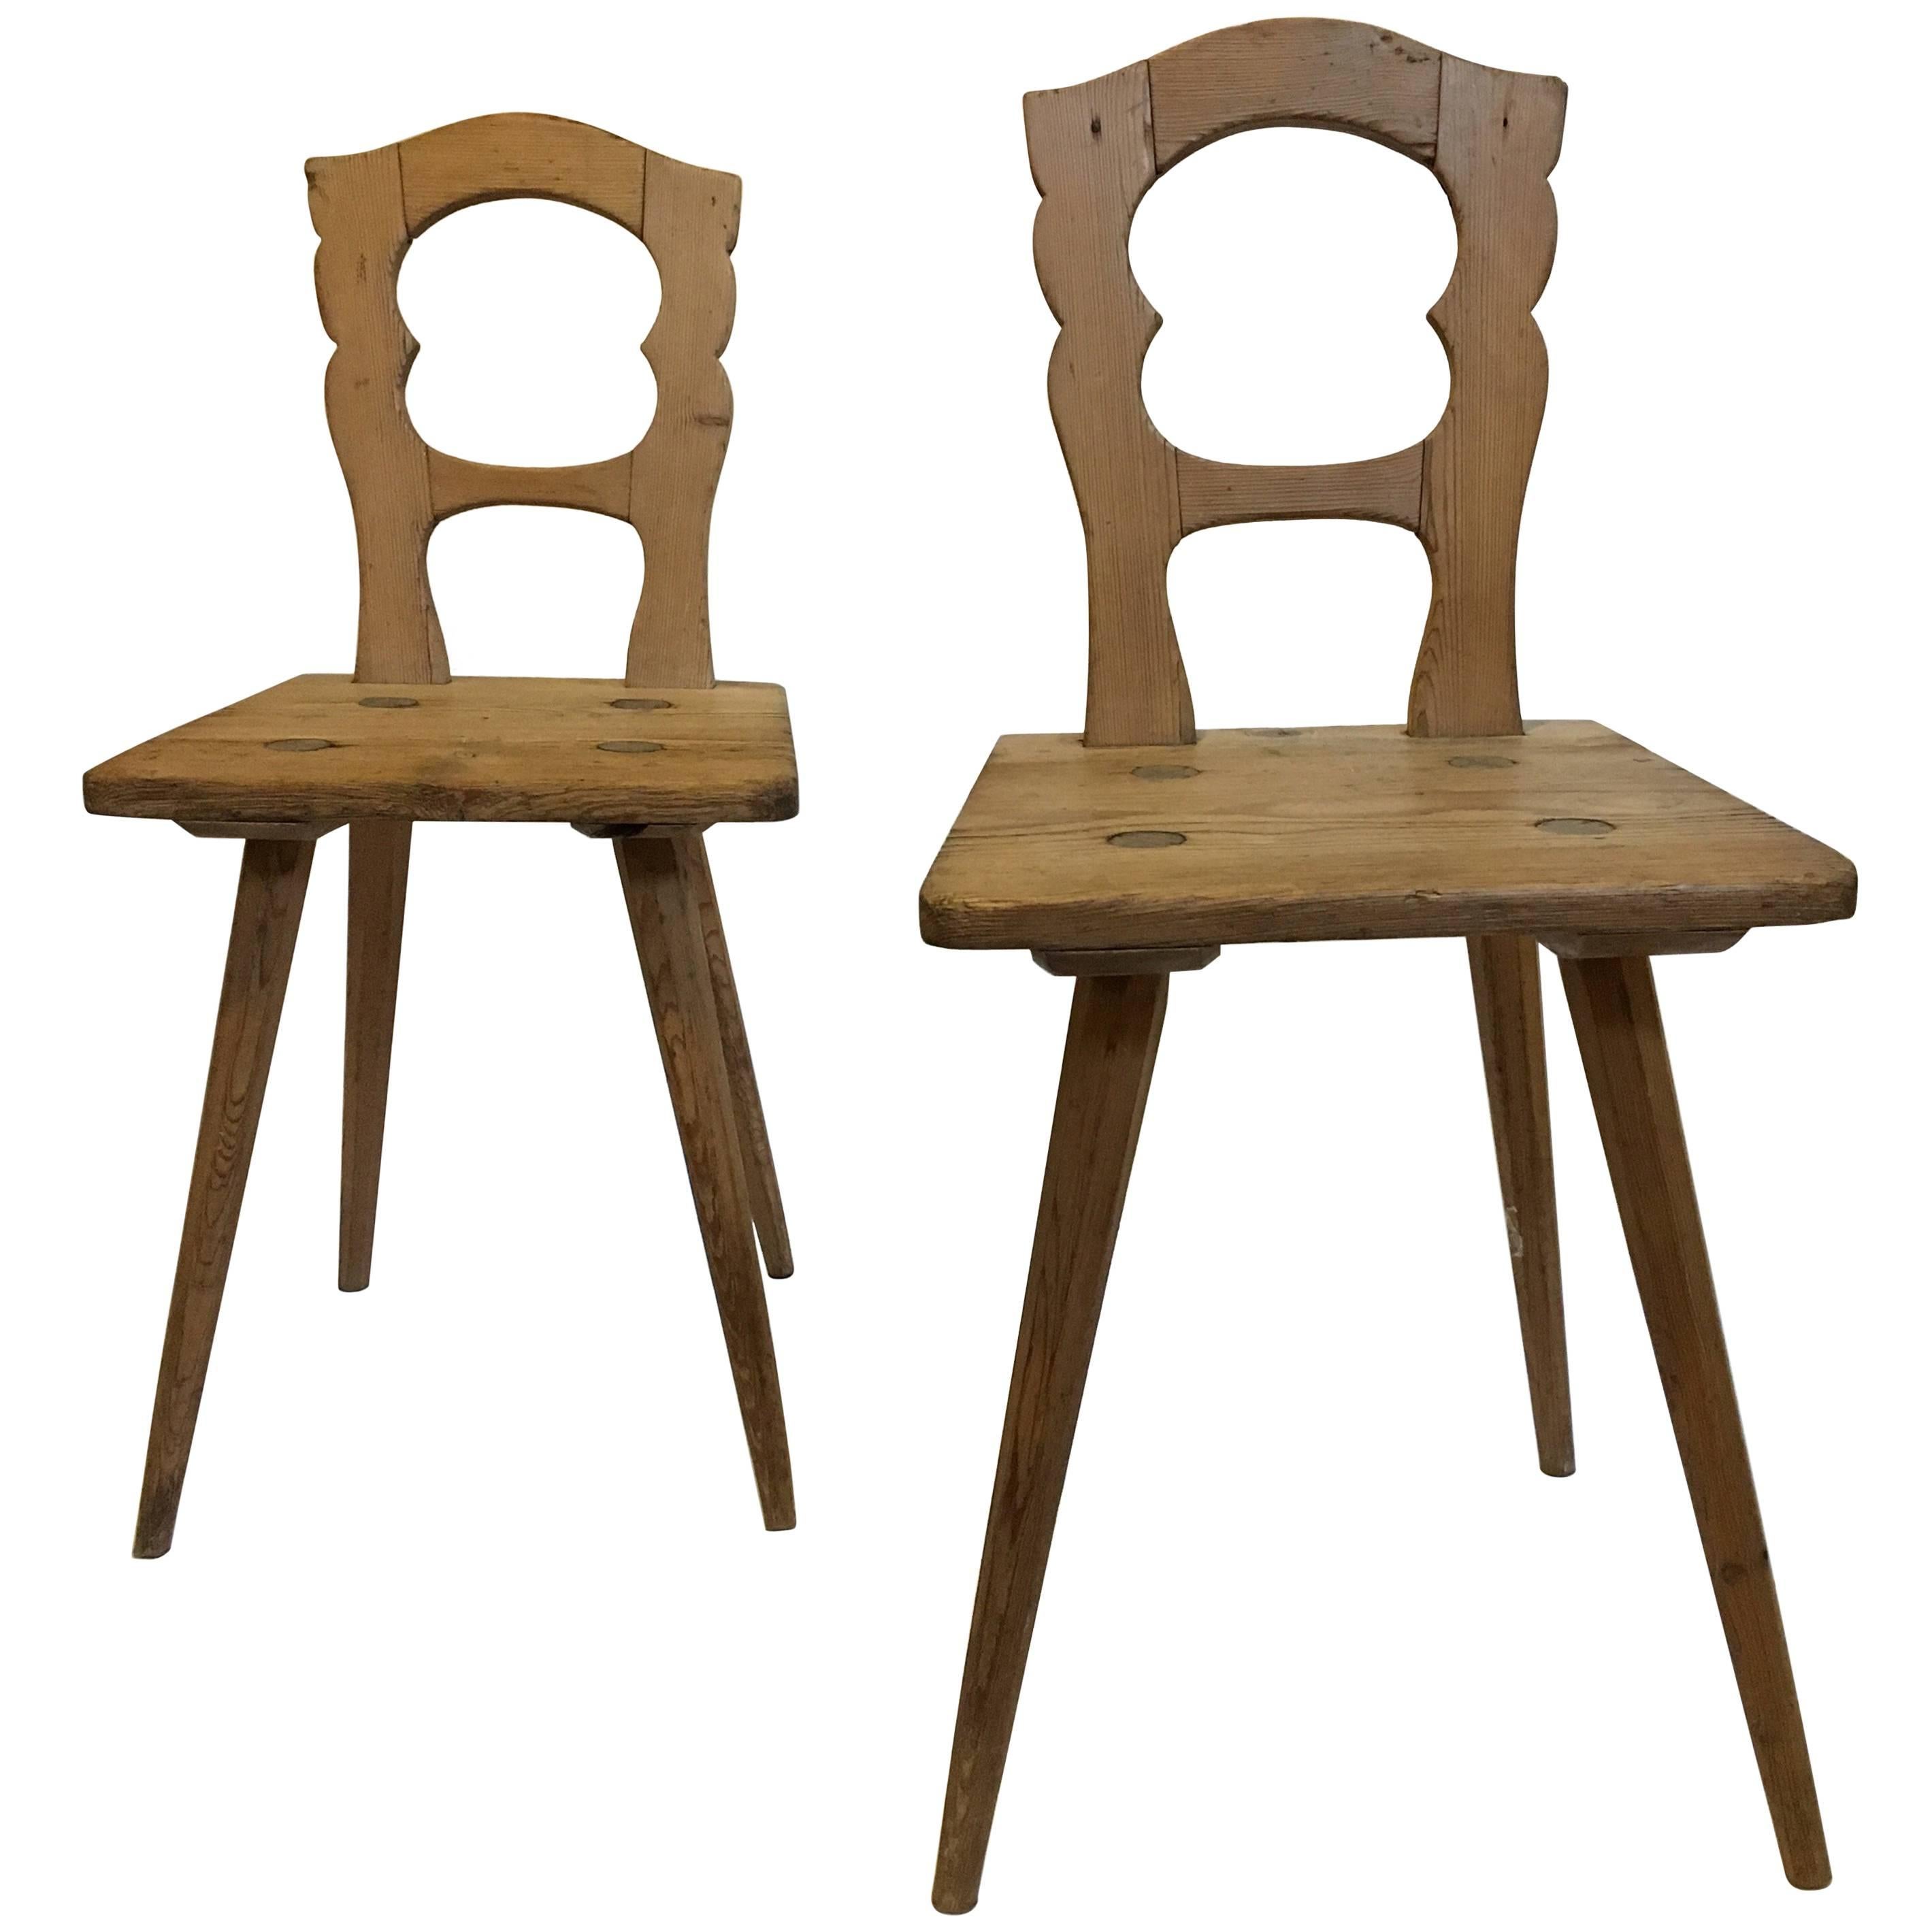 Pair of Early Pine Moravian Side Chairs, Pennsylvania, circa 1780